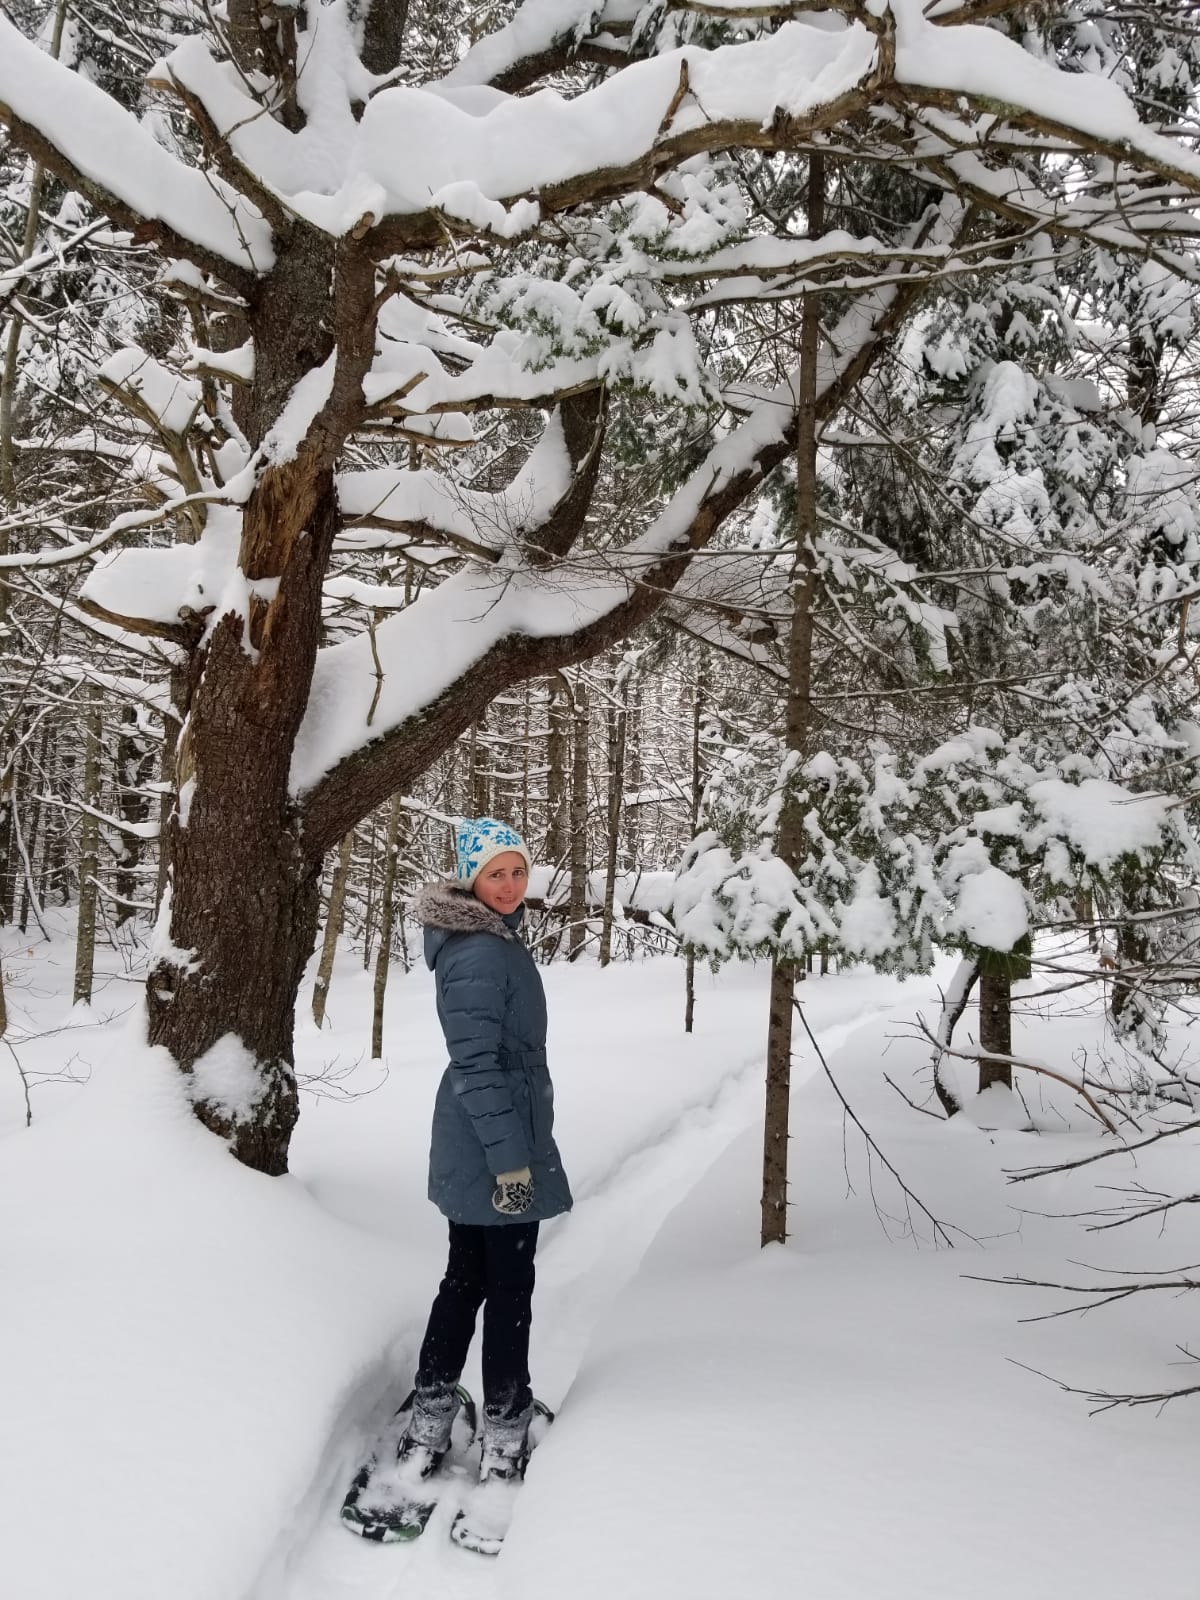 Elena on snow shoes on a trail through snowy trees. 